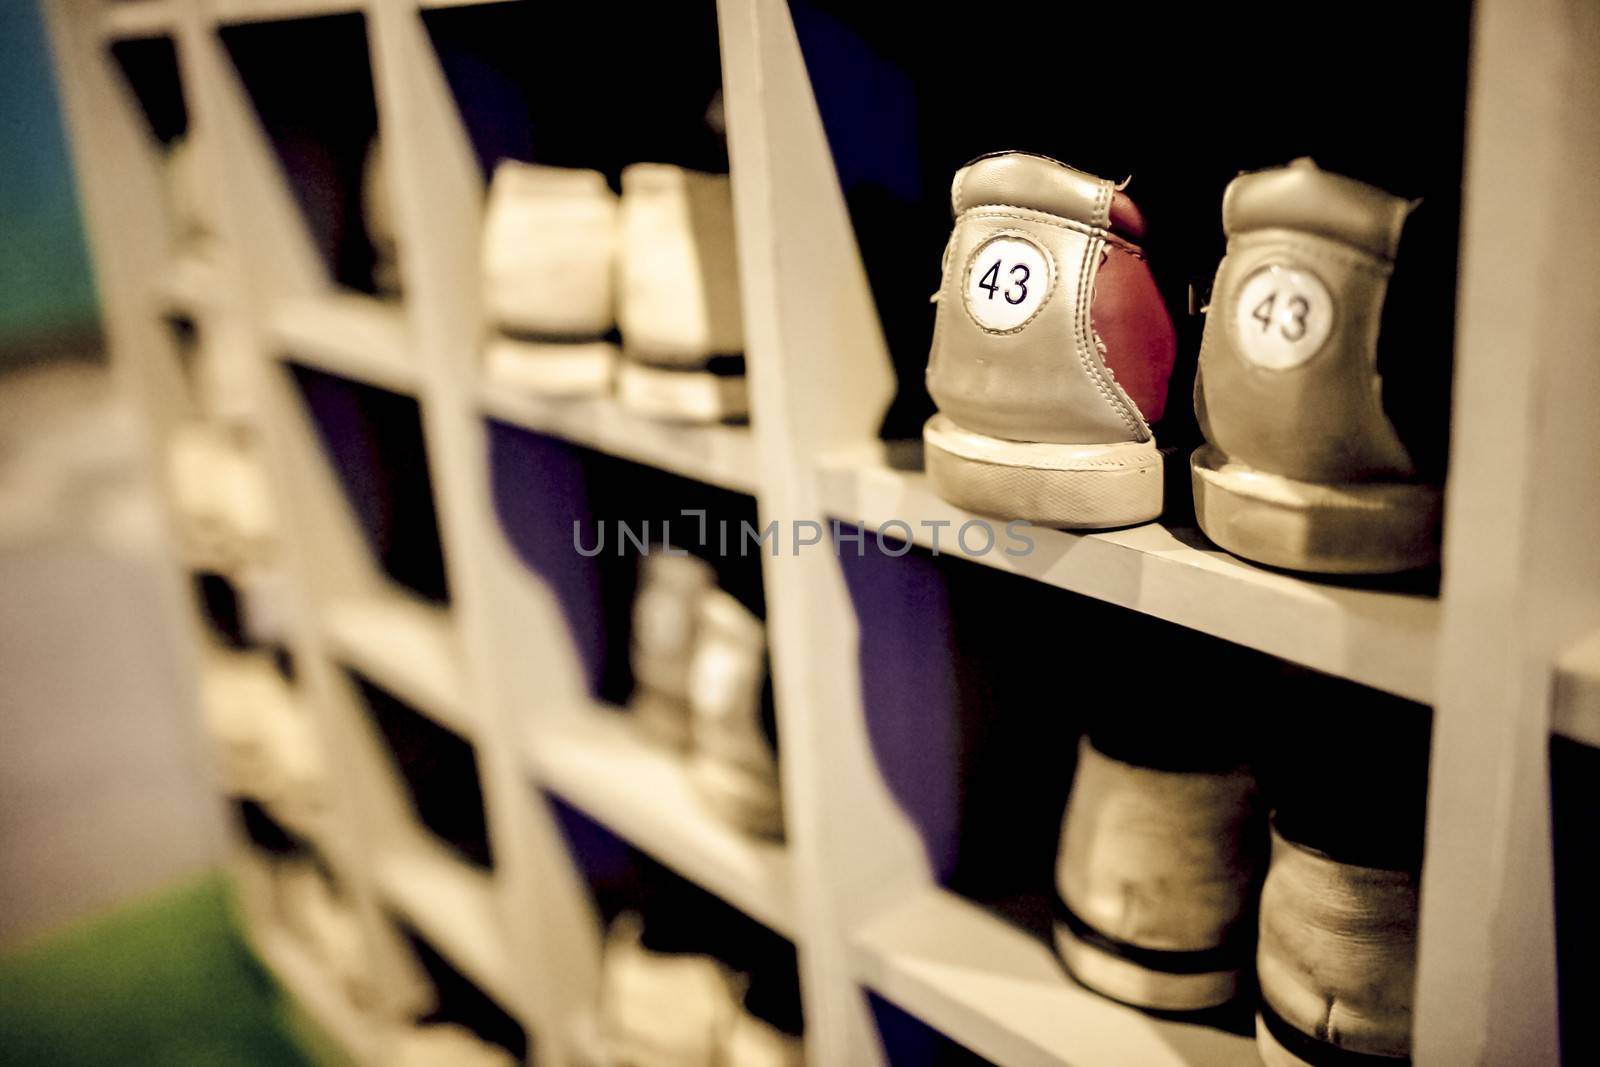 Shoe cupboard by the bowling alley, old  bowling shoes put in order, visible shoe sizes, numerous pairs of shoes, shallow DOF.